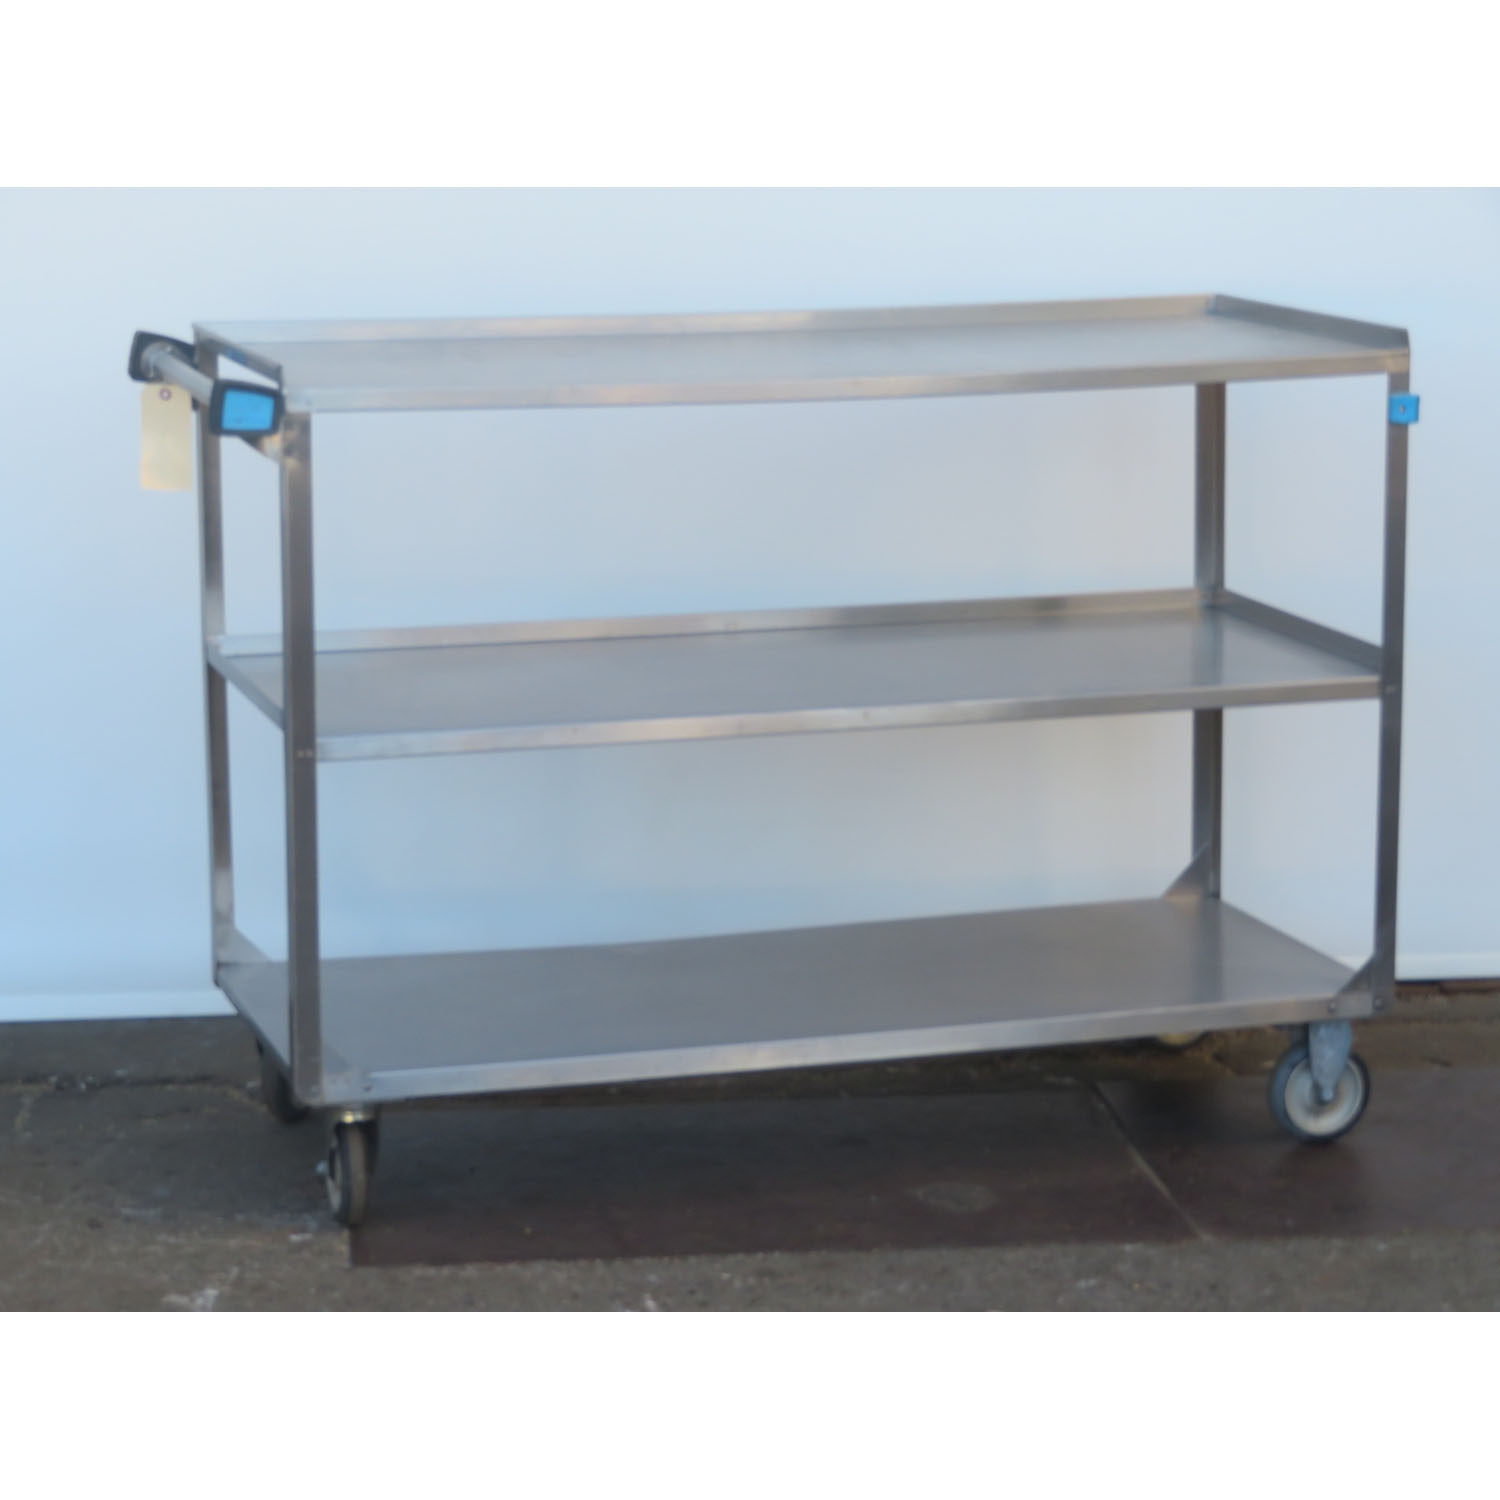 Lakeside 459 Stainless Steel Medium Duty 3 Shelf Utility Cart, Used Great Condition image 2